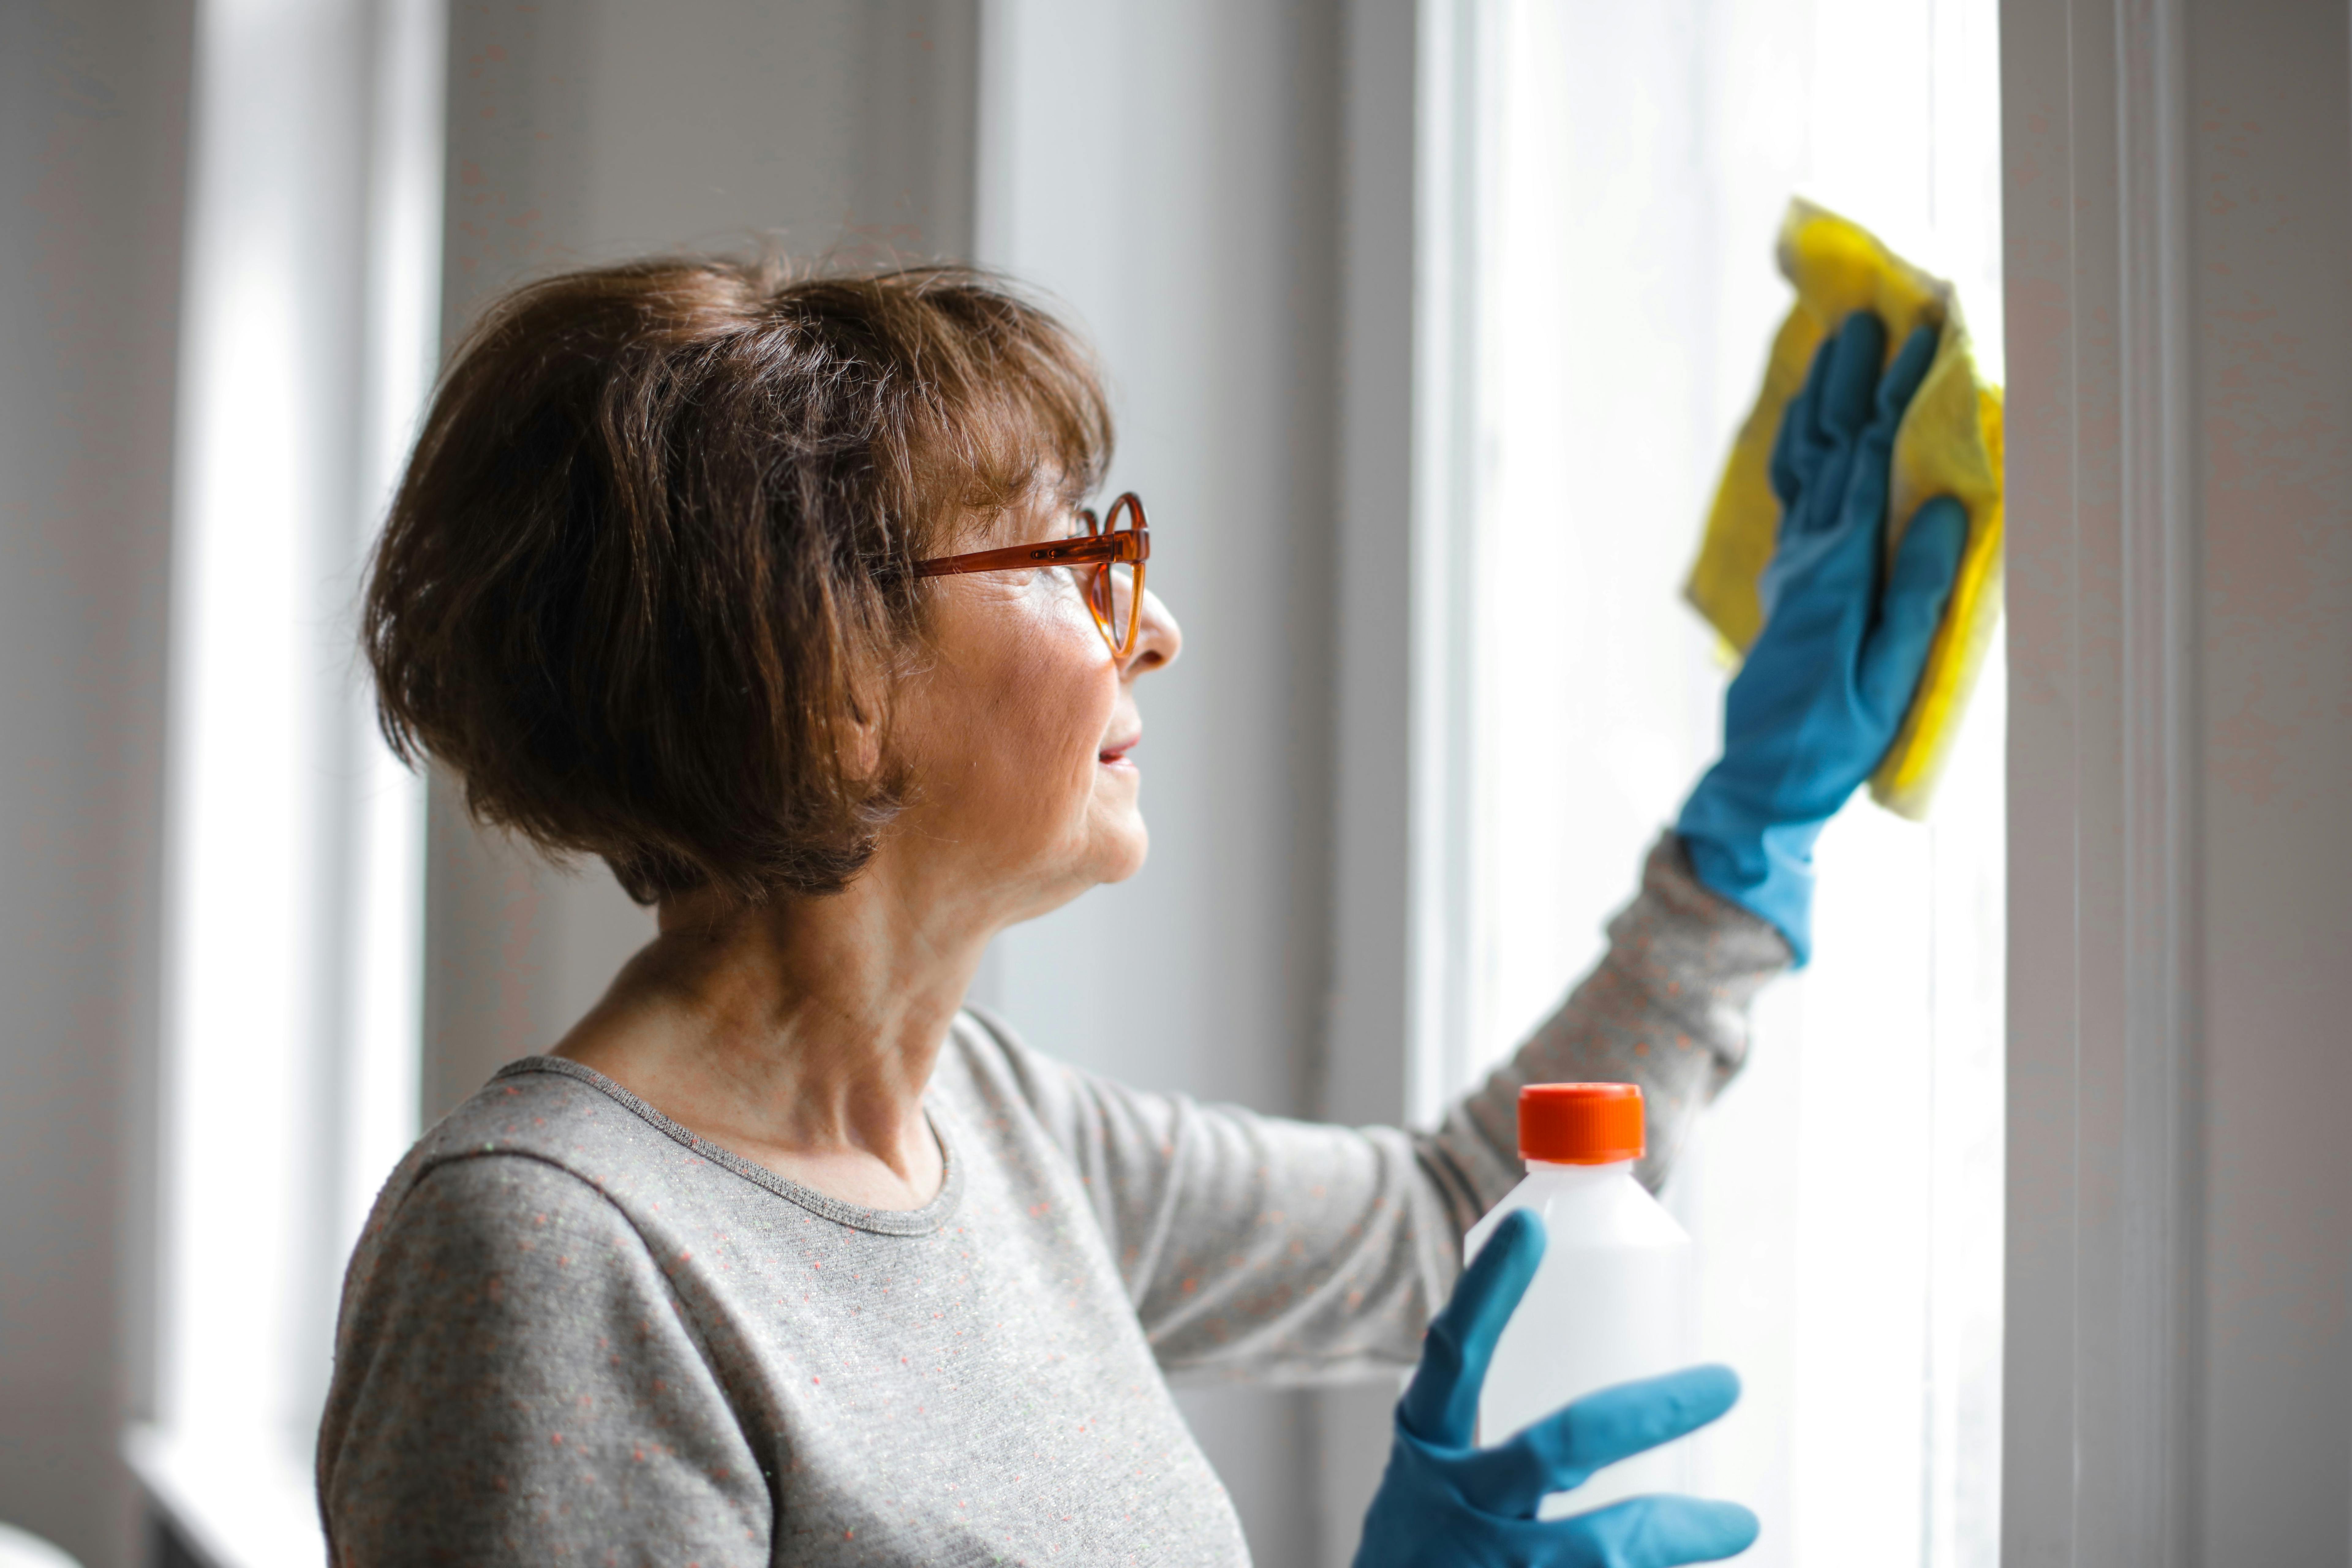 An older woman cleaning windows | Source: Pexels